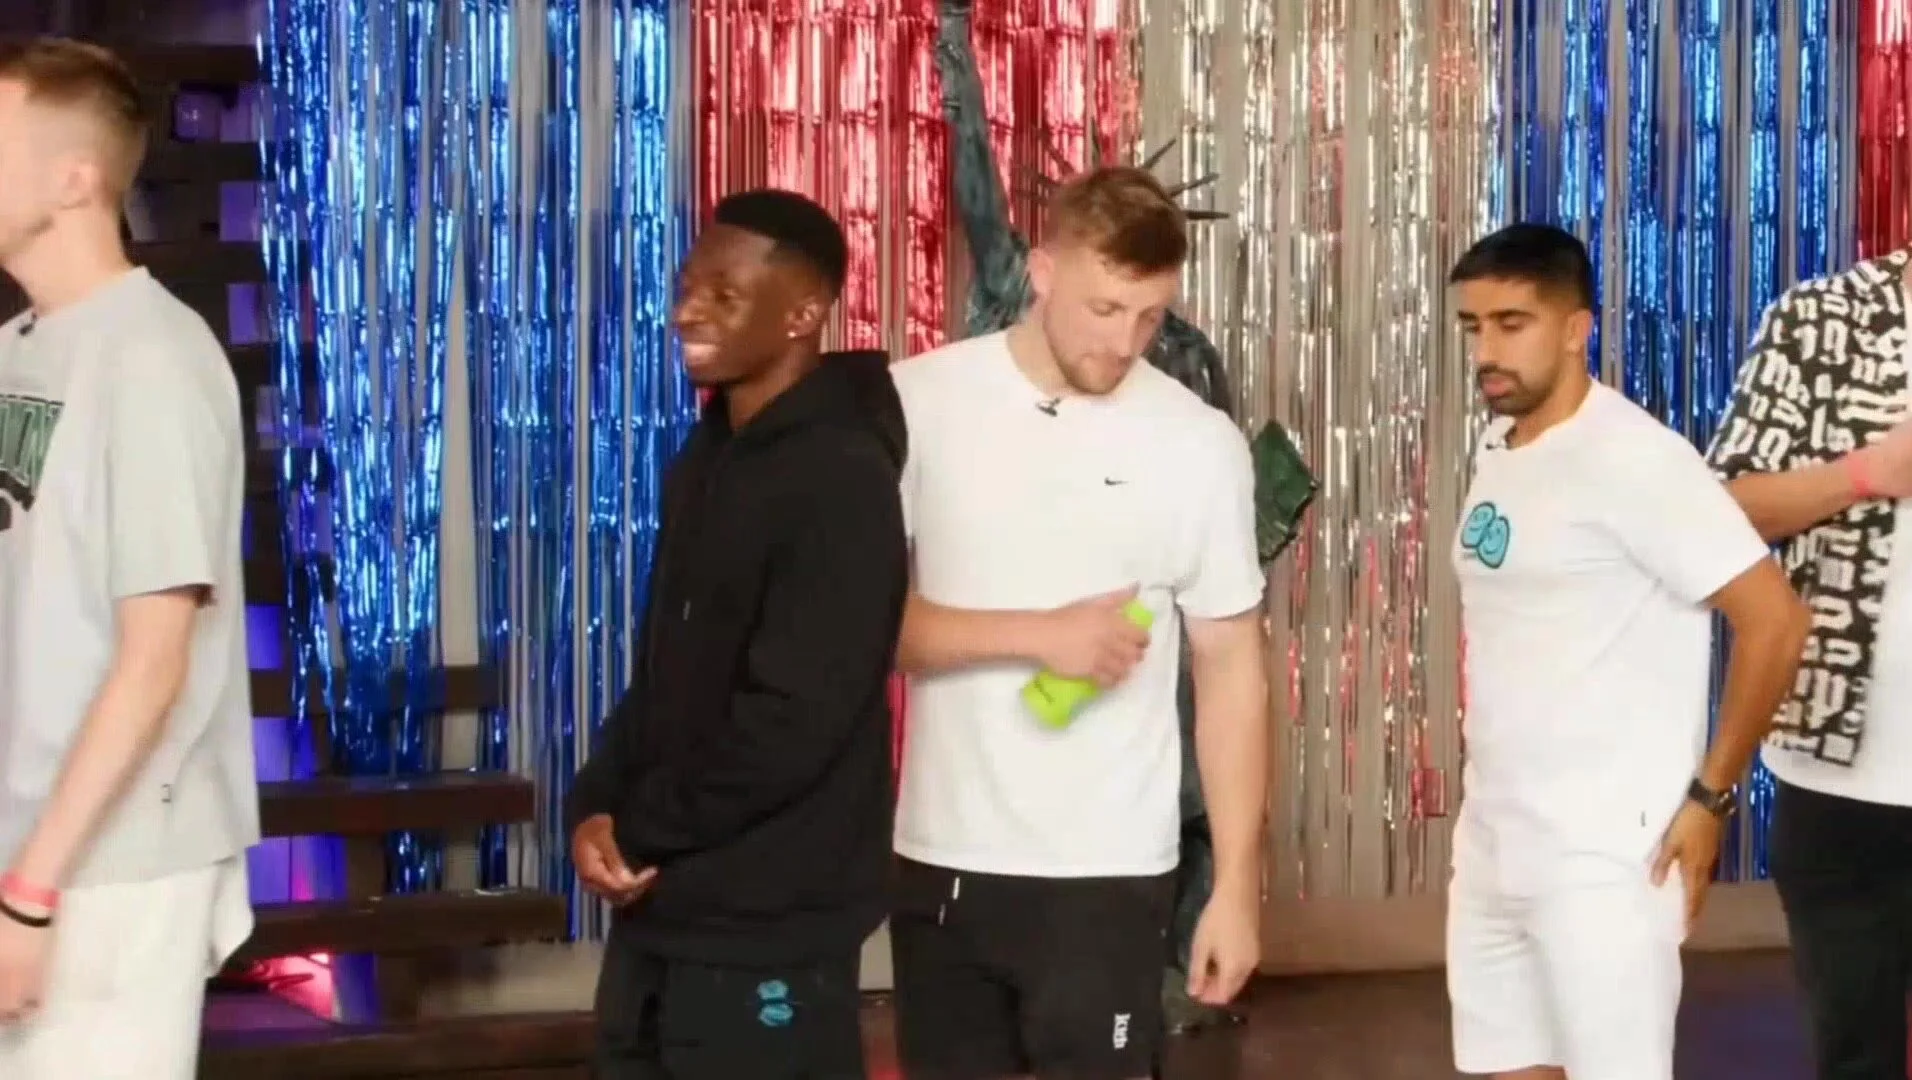 Flash Your Tits - KSI gets her to flash her tits in sidemen YouTube video - ThisVid.com